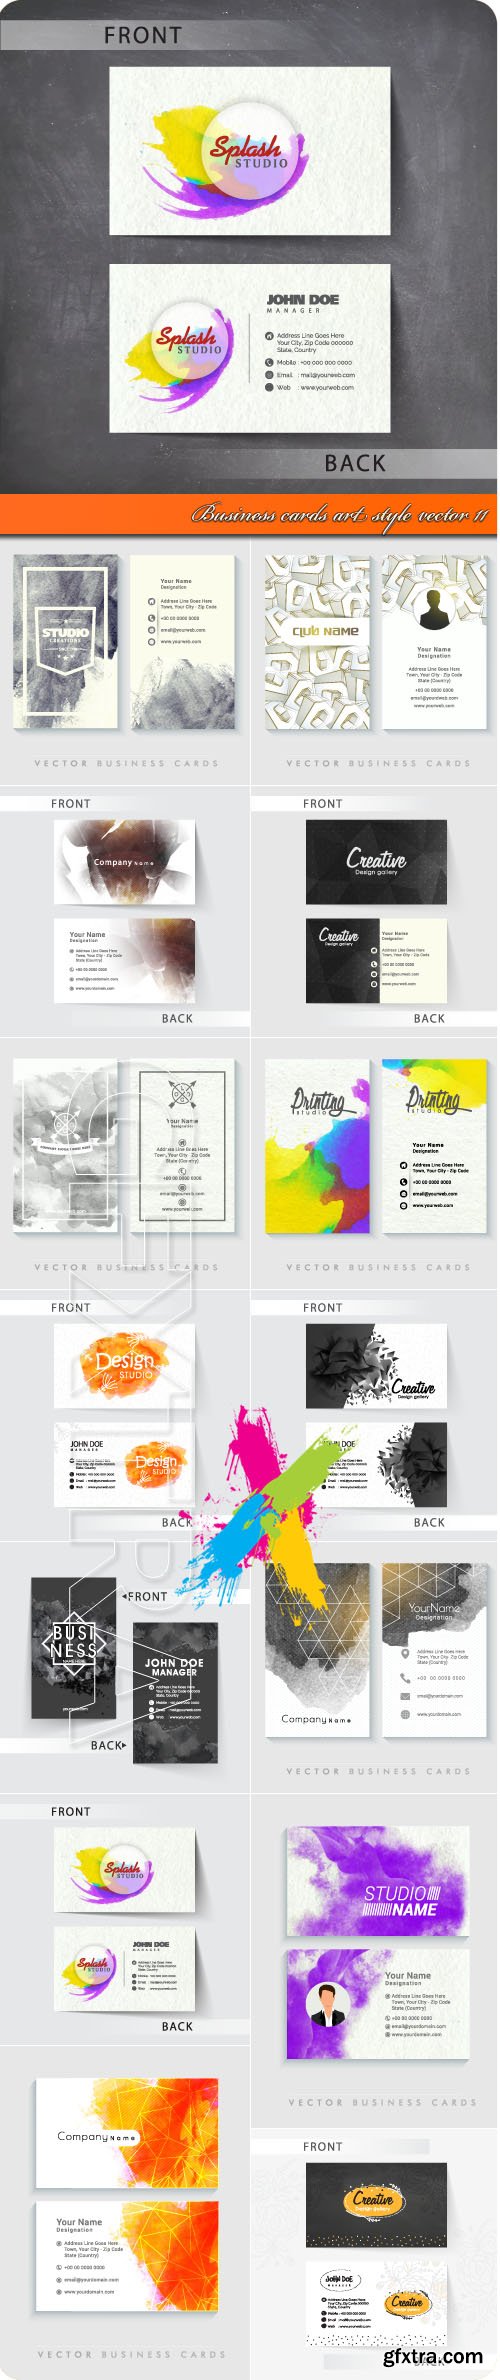 Business cards art style vector 11